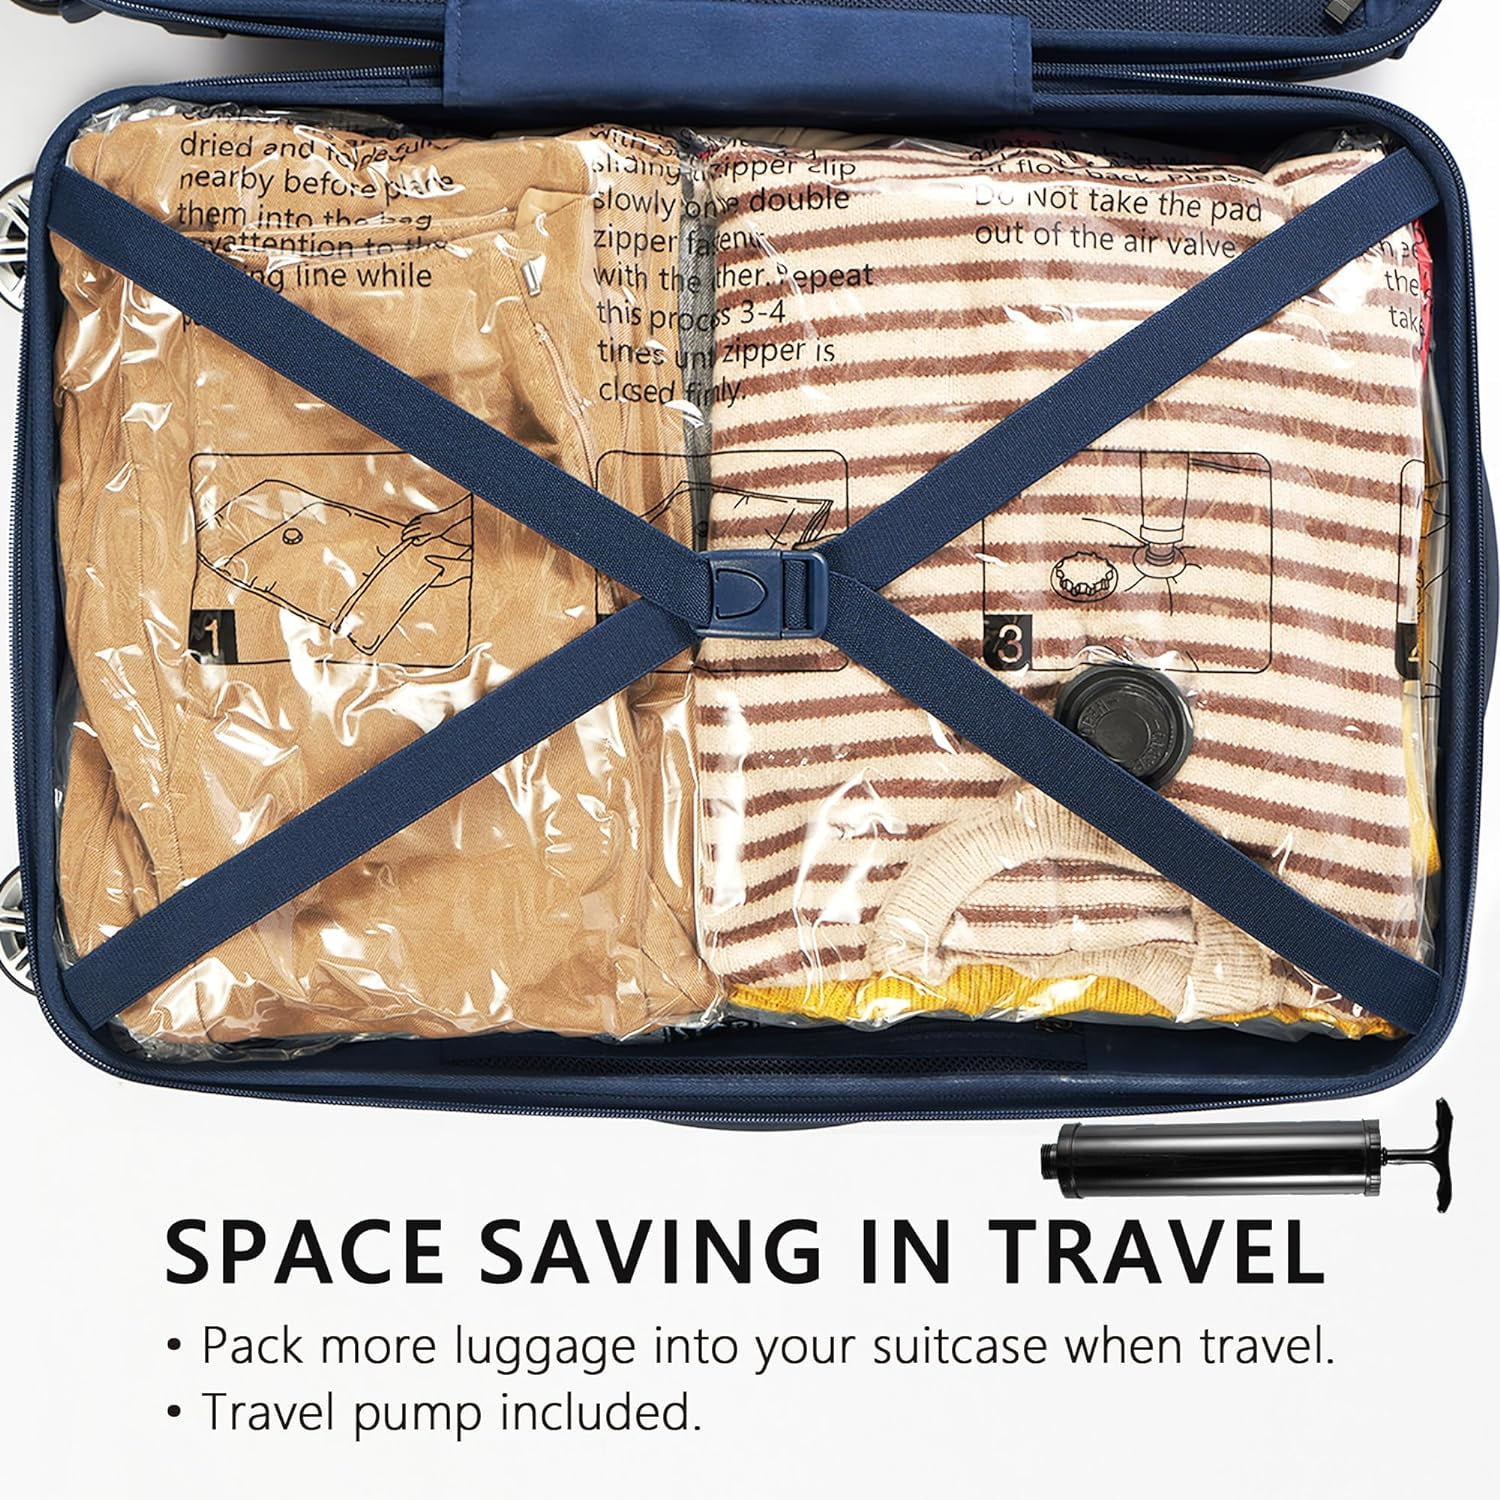 Score SpaceSaver Bags for 30% off on